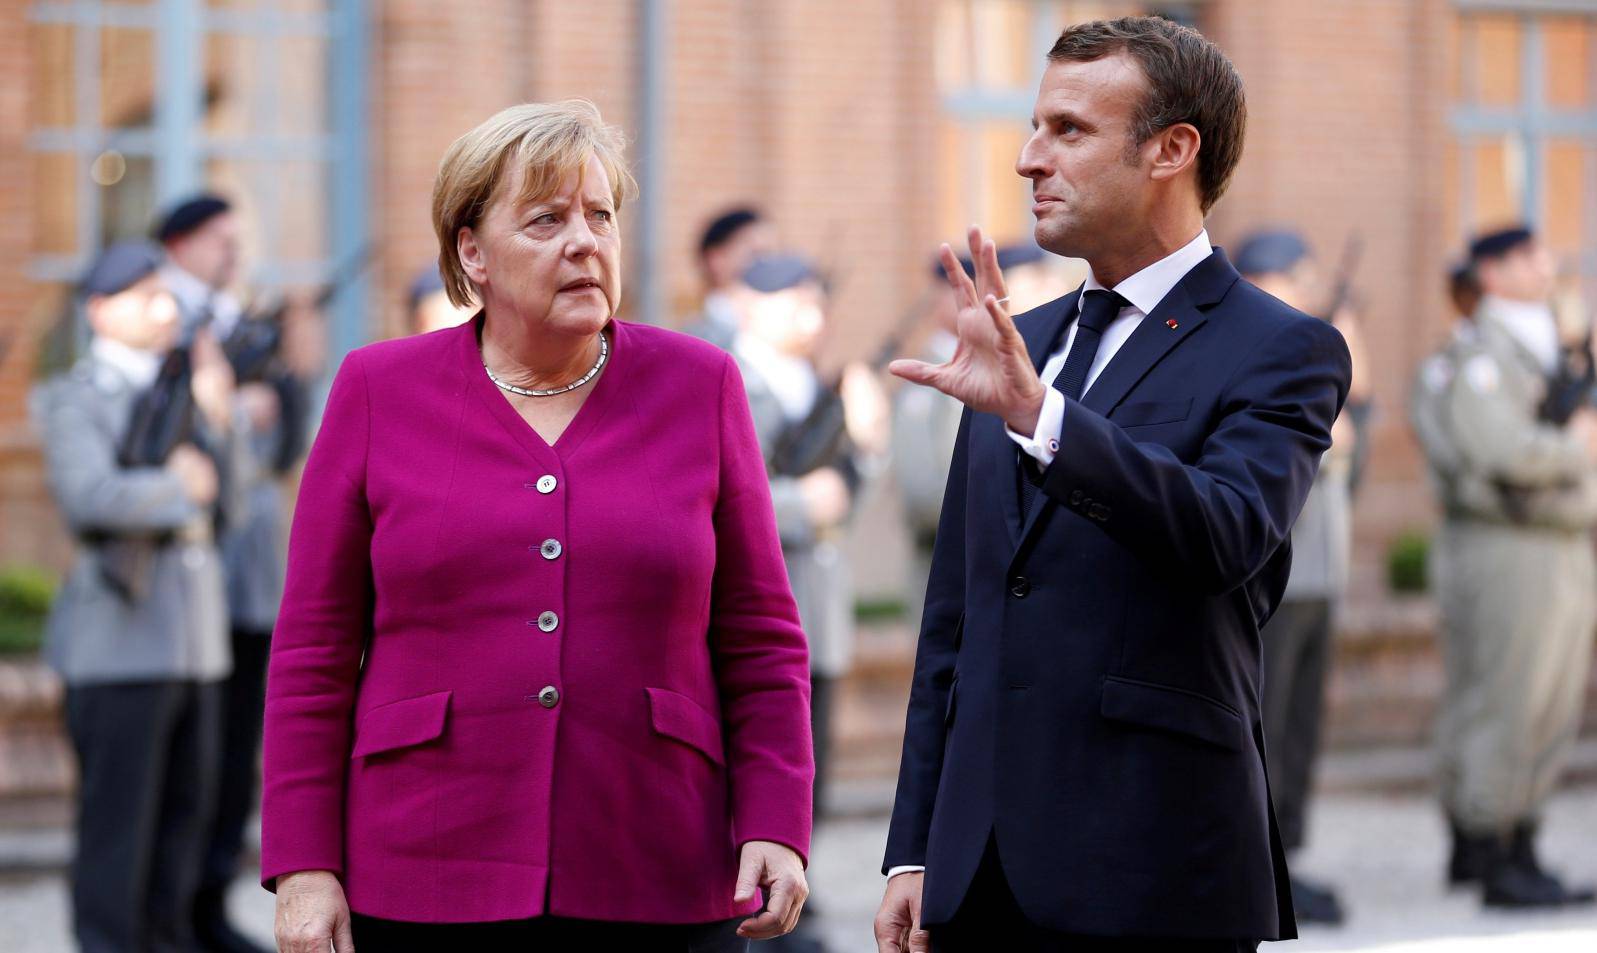 FILE PHOTO: French President Emmanuel Macron welcomes German Chancellor Angela Merkel before a joint Franco-German cabinet meeting in Toulouse